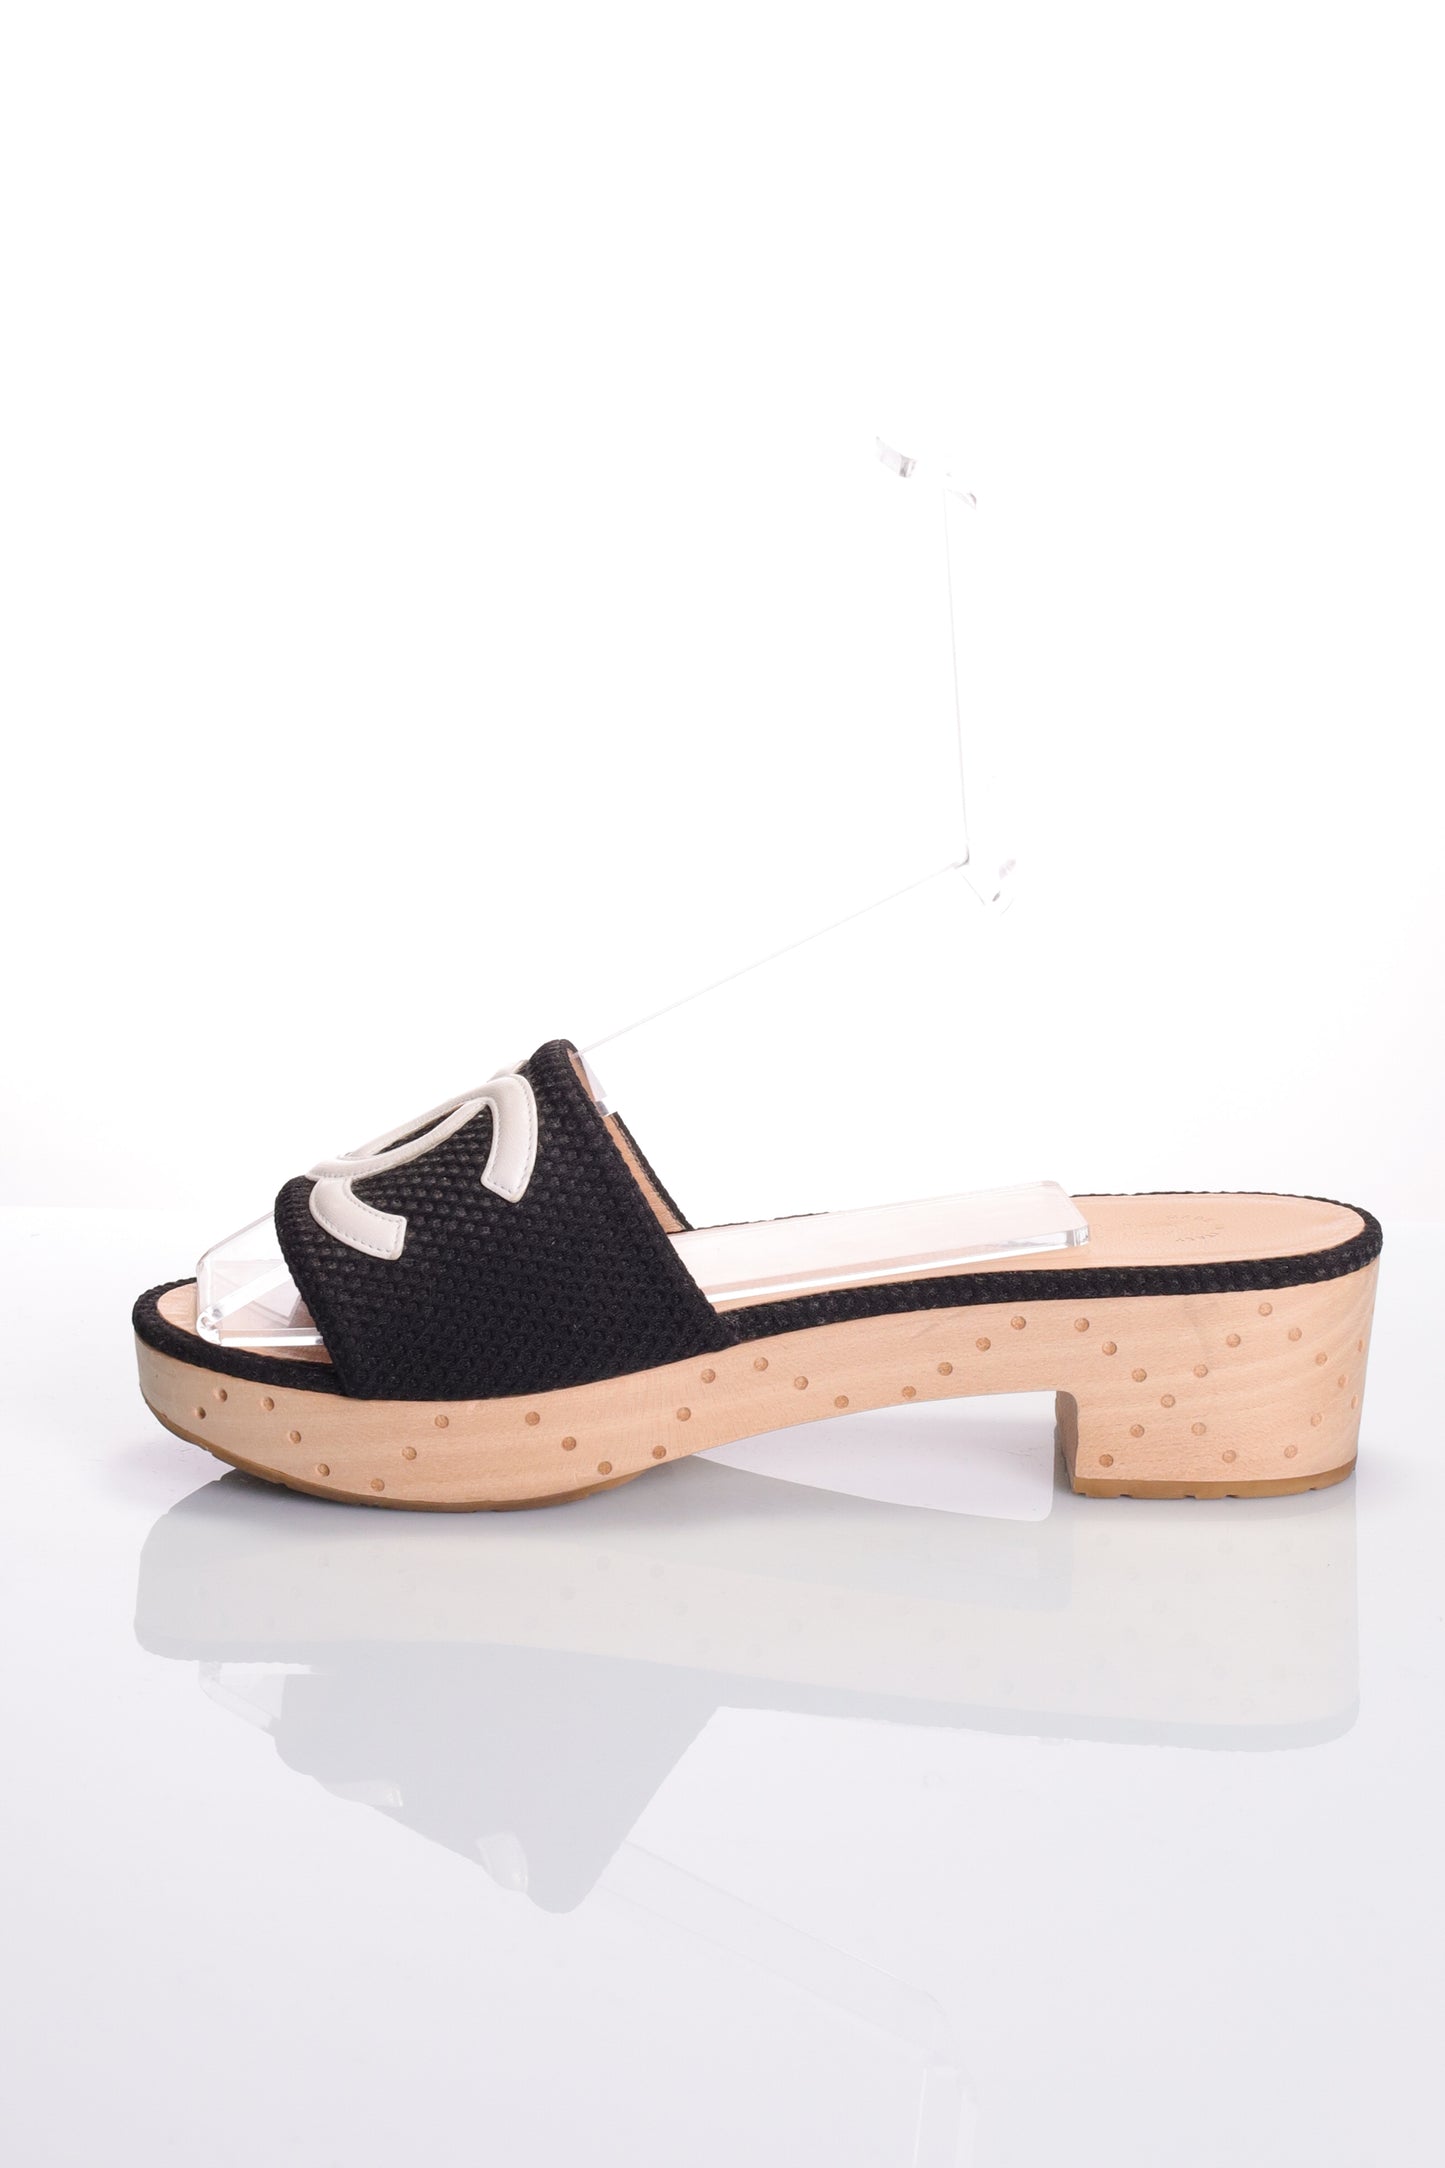 CHANEL MULES size. 41 CHA NEL Sandals G27145 Mules